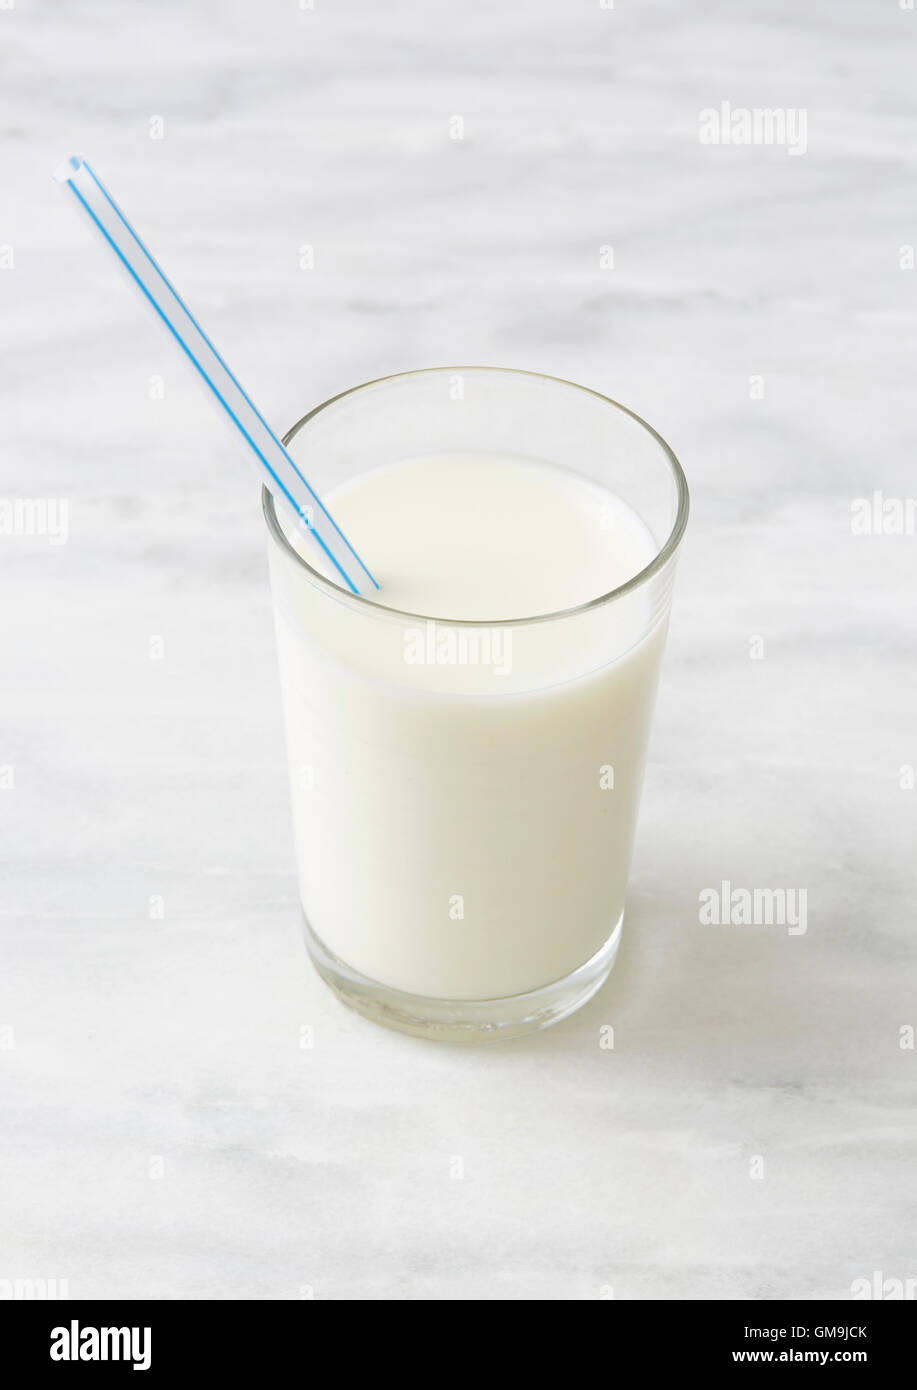 Glass of milk with drinking straw Stock Photo